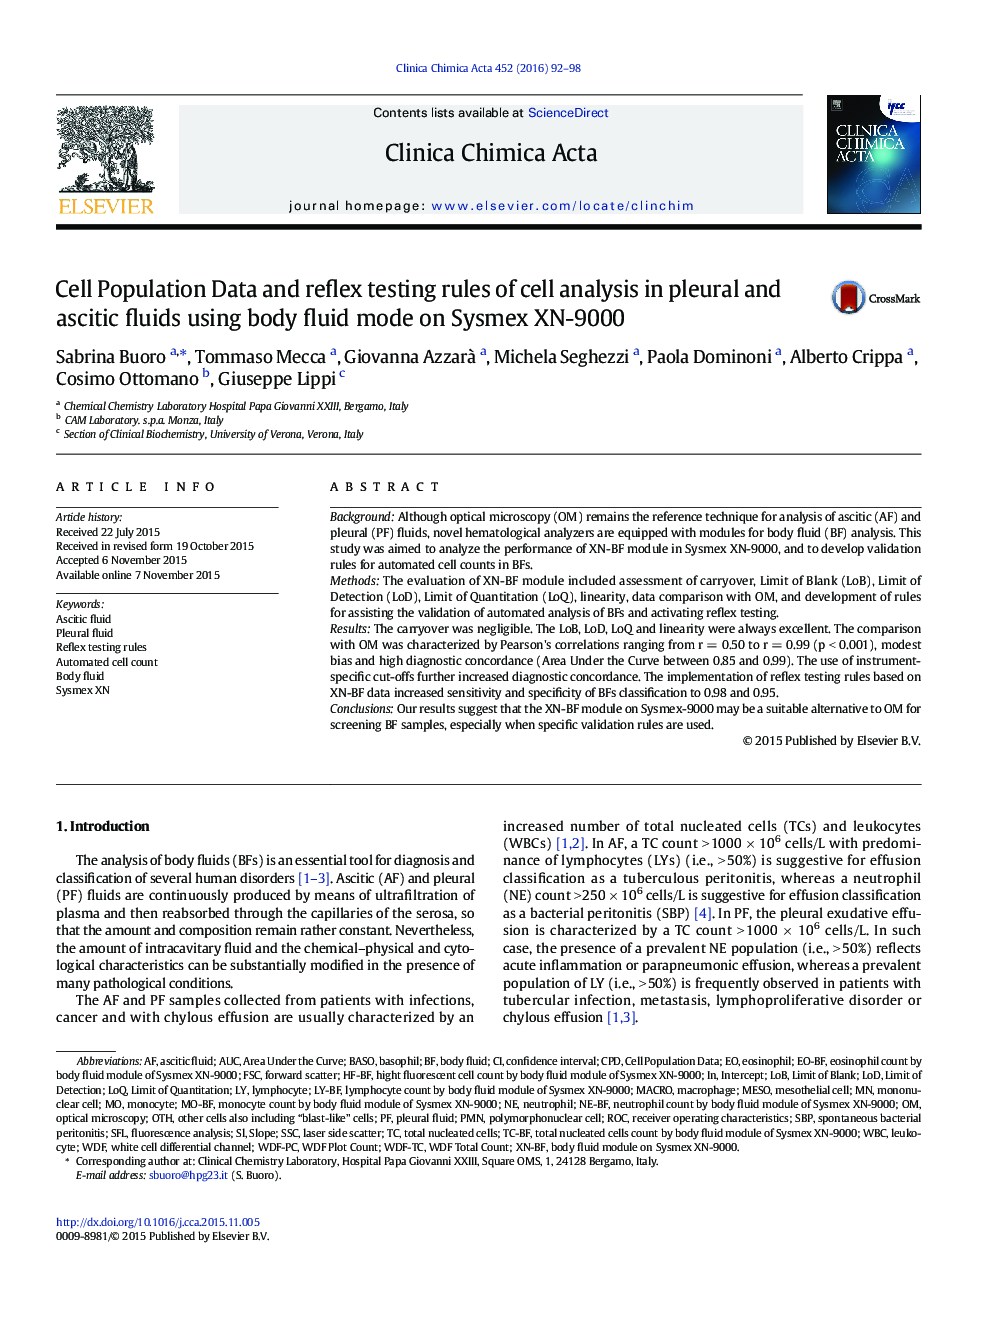 Cell Population Data and reflex testing rules of cell analysis in pleural and ascitic fluids using body fluid mode on Sysmex XN-9000